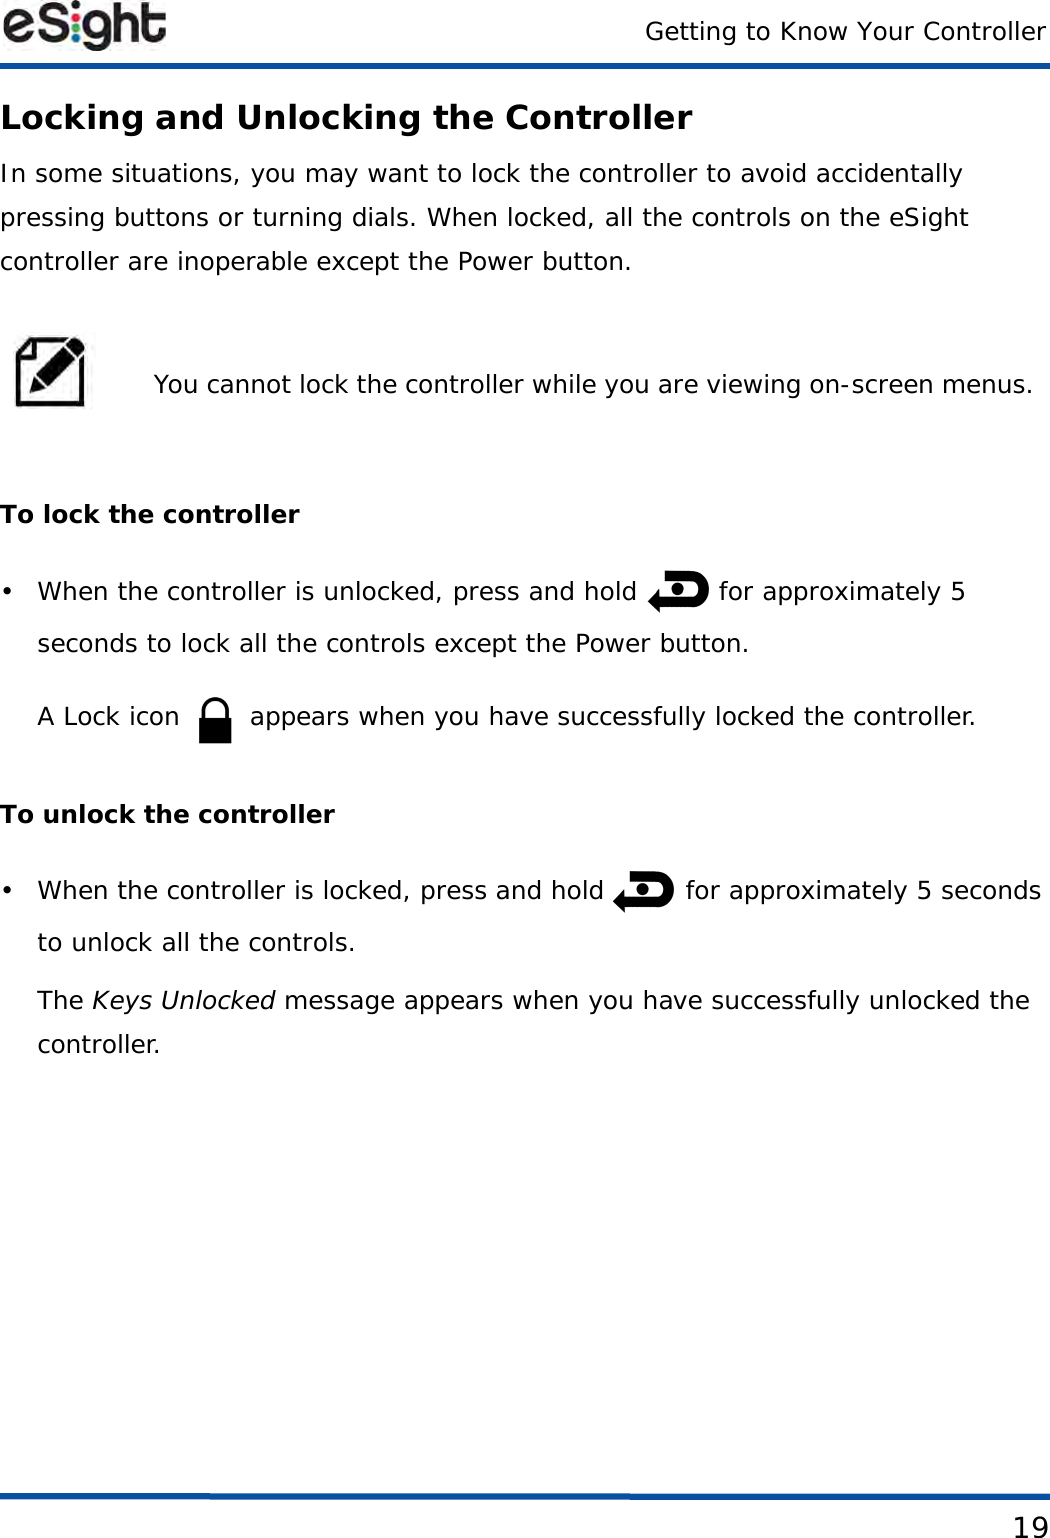 Getting to Know Your Controller19Locking and Unlocking the ControllerIn some situations, you may want to lock the controller to avoid accidentally pressing buttons or turning dials. When locked, all the controls on the eSight controller are inoperable except the Power button. To lock the controller• When the controller is unlocked, press and hold   for approximately 5 seconds to lock all the controls except the Power button.A Lock icon   appears when you have successfully locked the controller.To unlock the controller• When the controller is locked, press and hold   for approximately 5 seconds to unlock all the controls.The Keys Unlocked message appears when you have successfully unlocked the controller.You cannot lock the controller while you are viewing on-screen menus. 